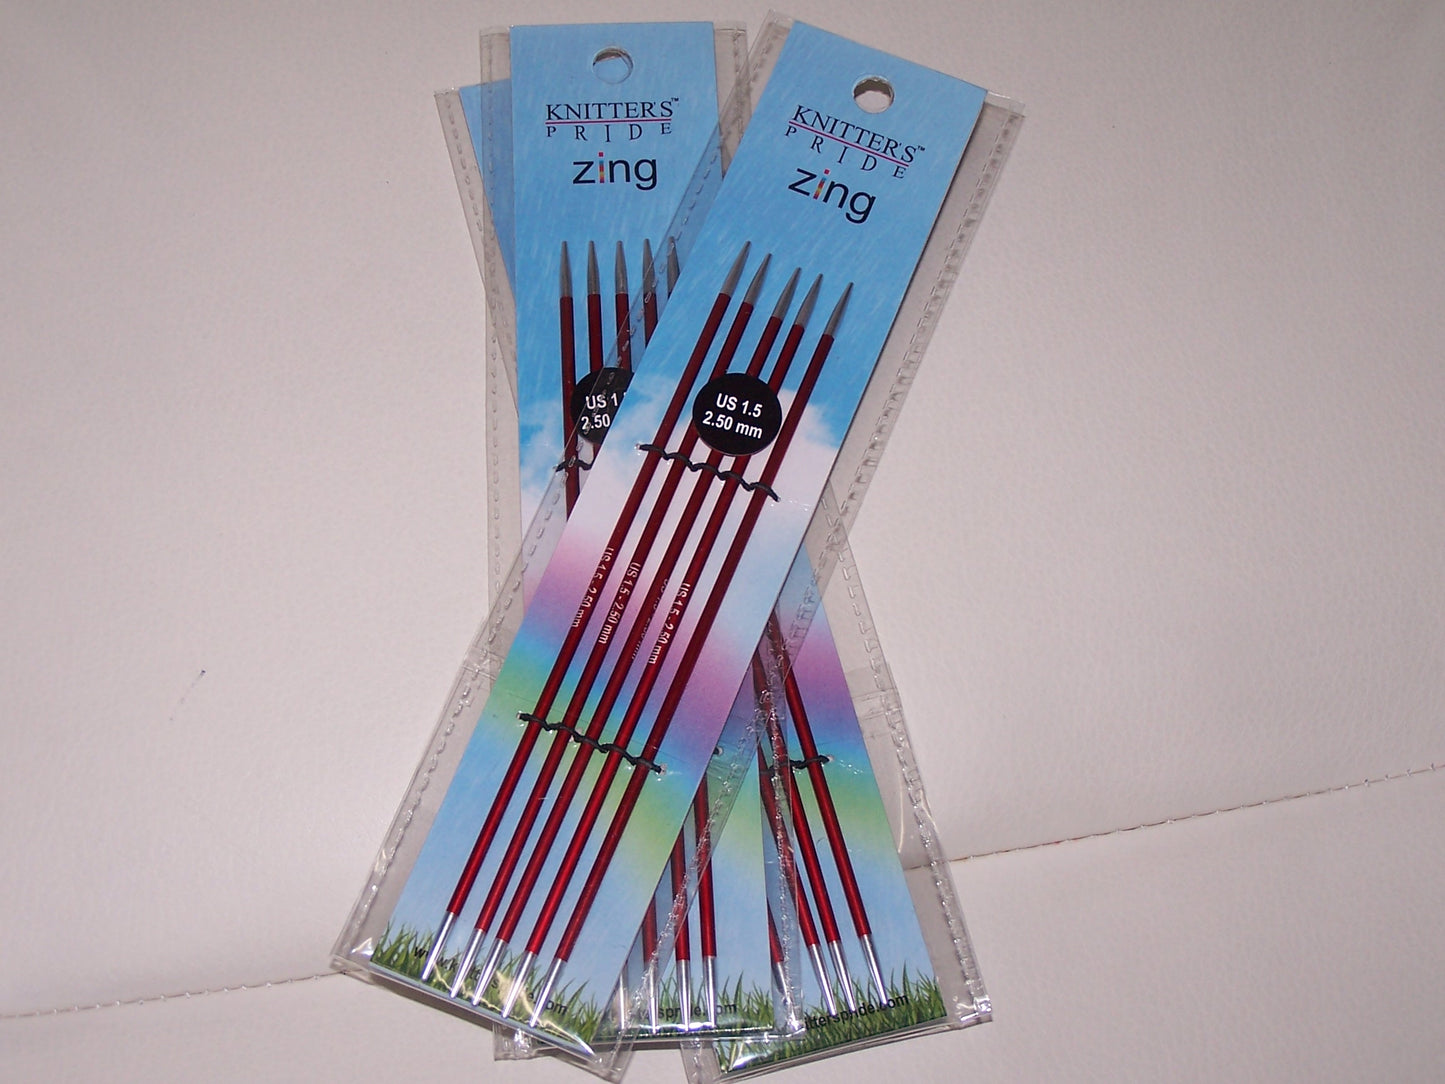 Knitters Pride Zing US 1.5 (2.50mm) size 6" inch DPN's